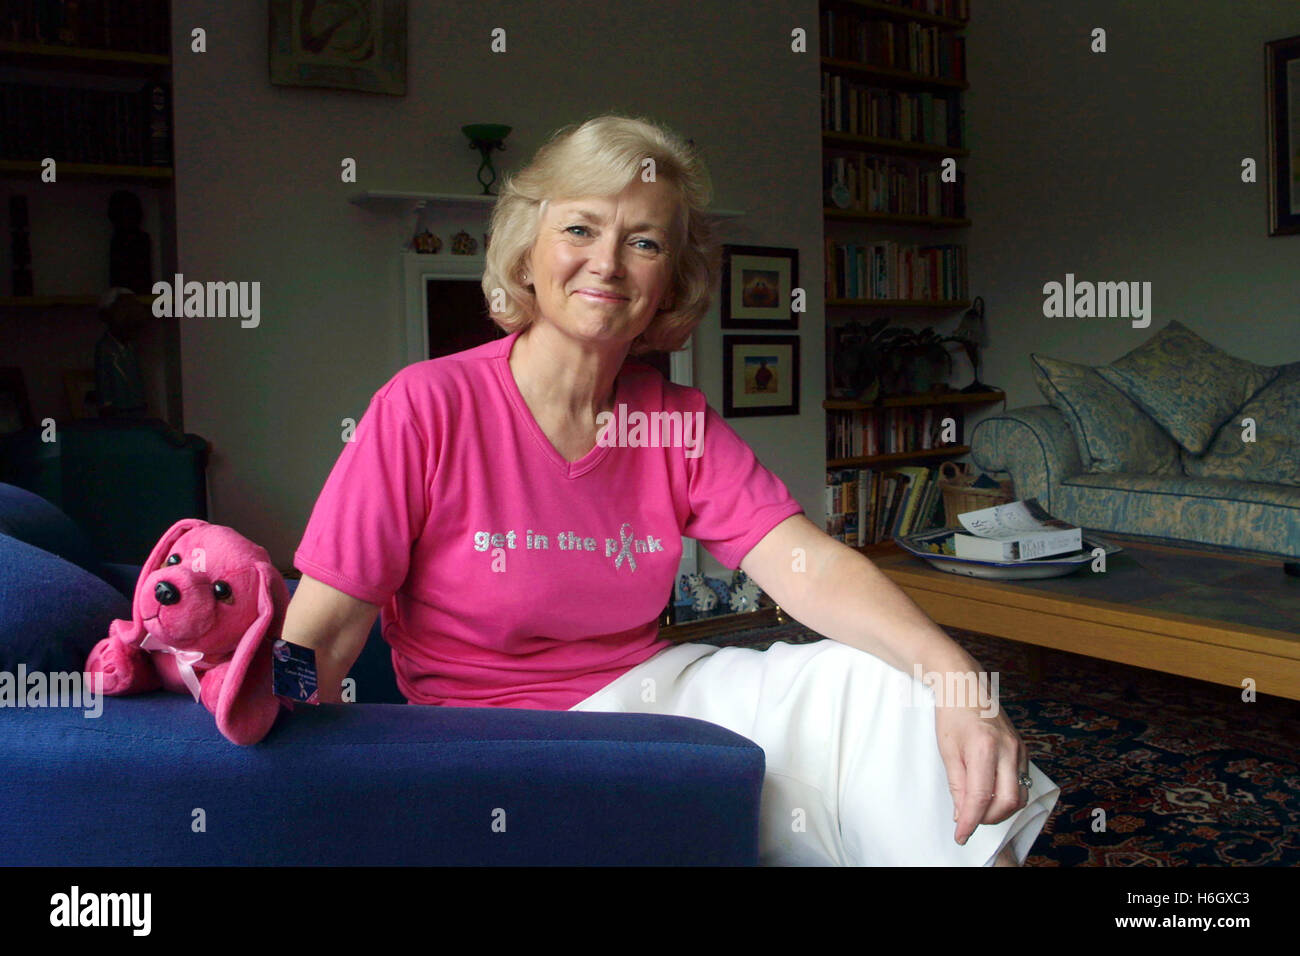 Glenys Kinnock, Baroness Kinnock of Holyhead, wearing a 'Get in the pink' T shirt for Cancer Research, 2001, charity event Stock Photo